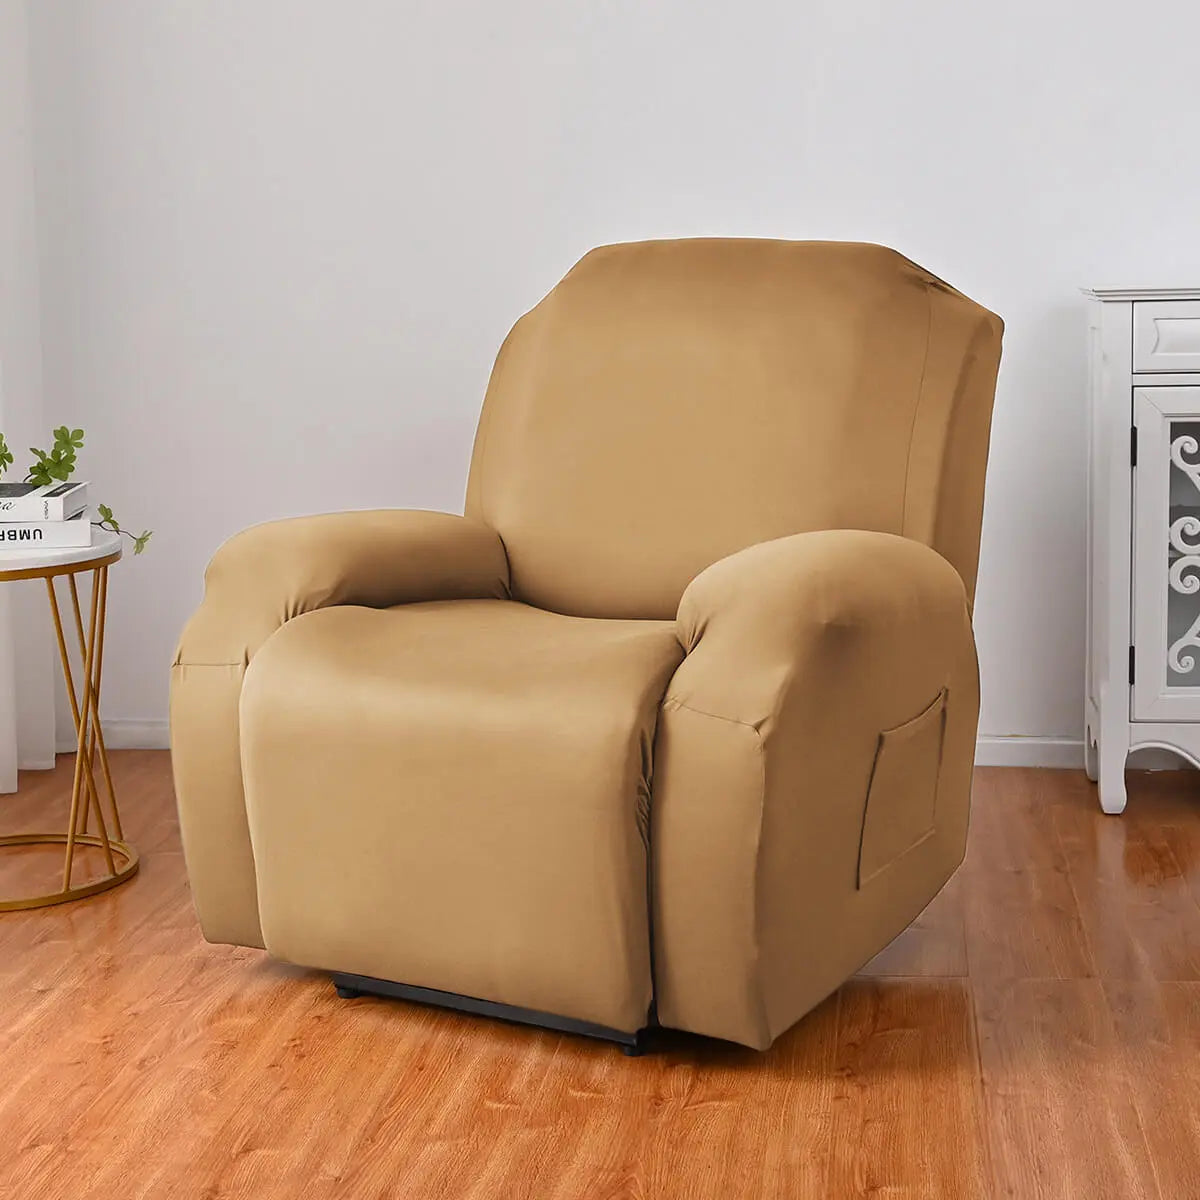 Crfatop Durable Recliner Chair Cover Solid Color Lazy Boy Recliner Slipcover